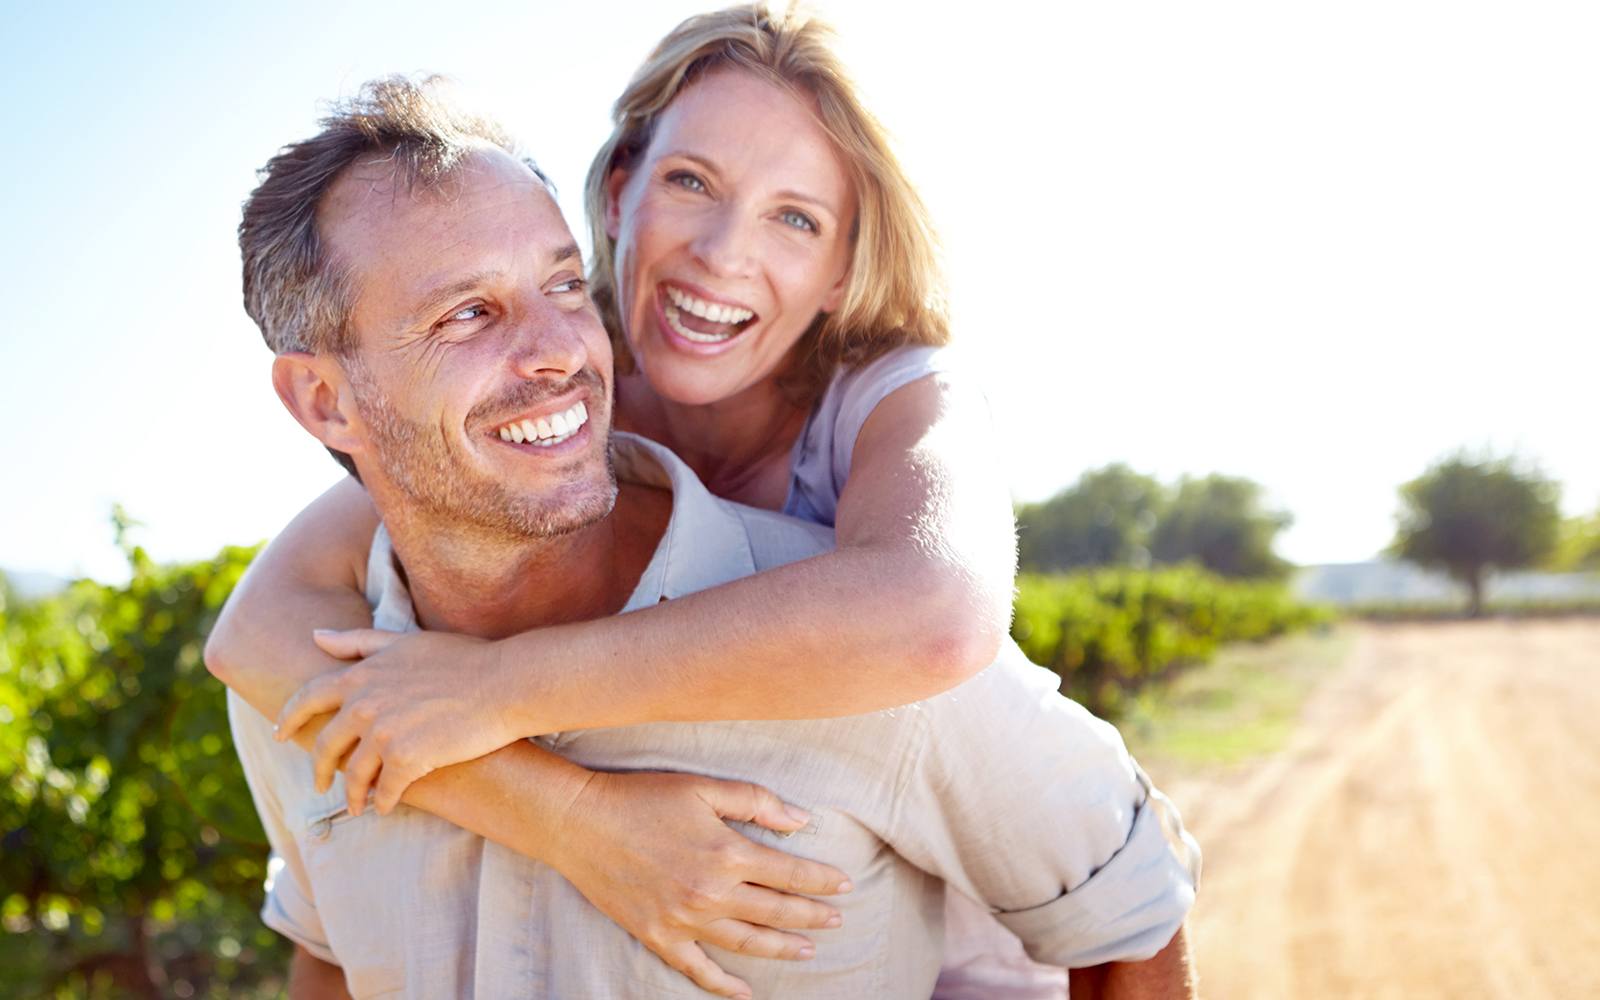 Male Fertility Visit Chicago Ivf™ In Illinois And Indiana